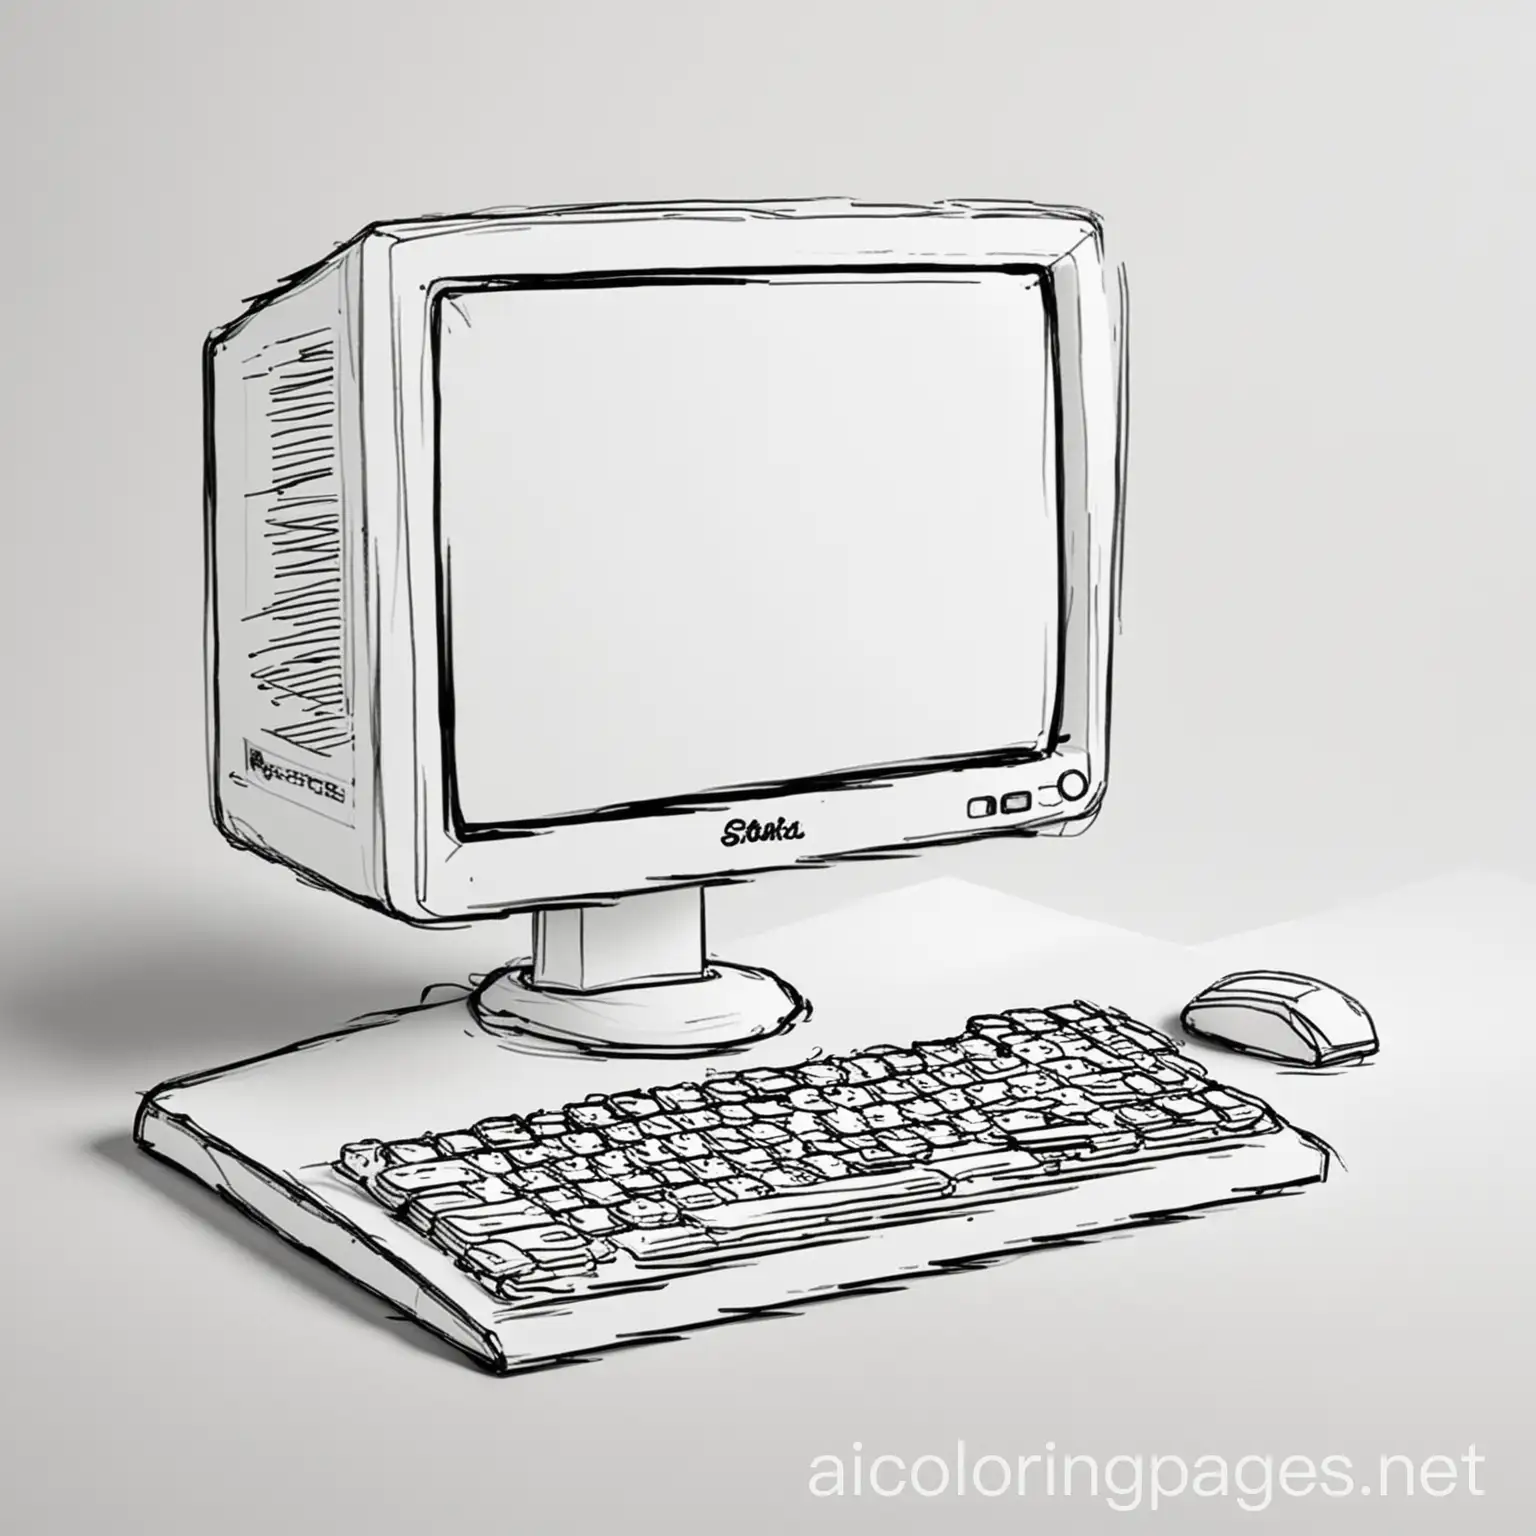 Realistic-Computer-Coloring-Page-for-Kids-Simple-Line-Art-on-White-Background